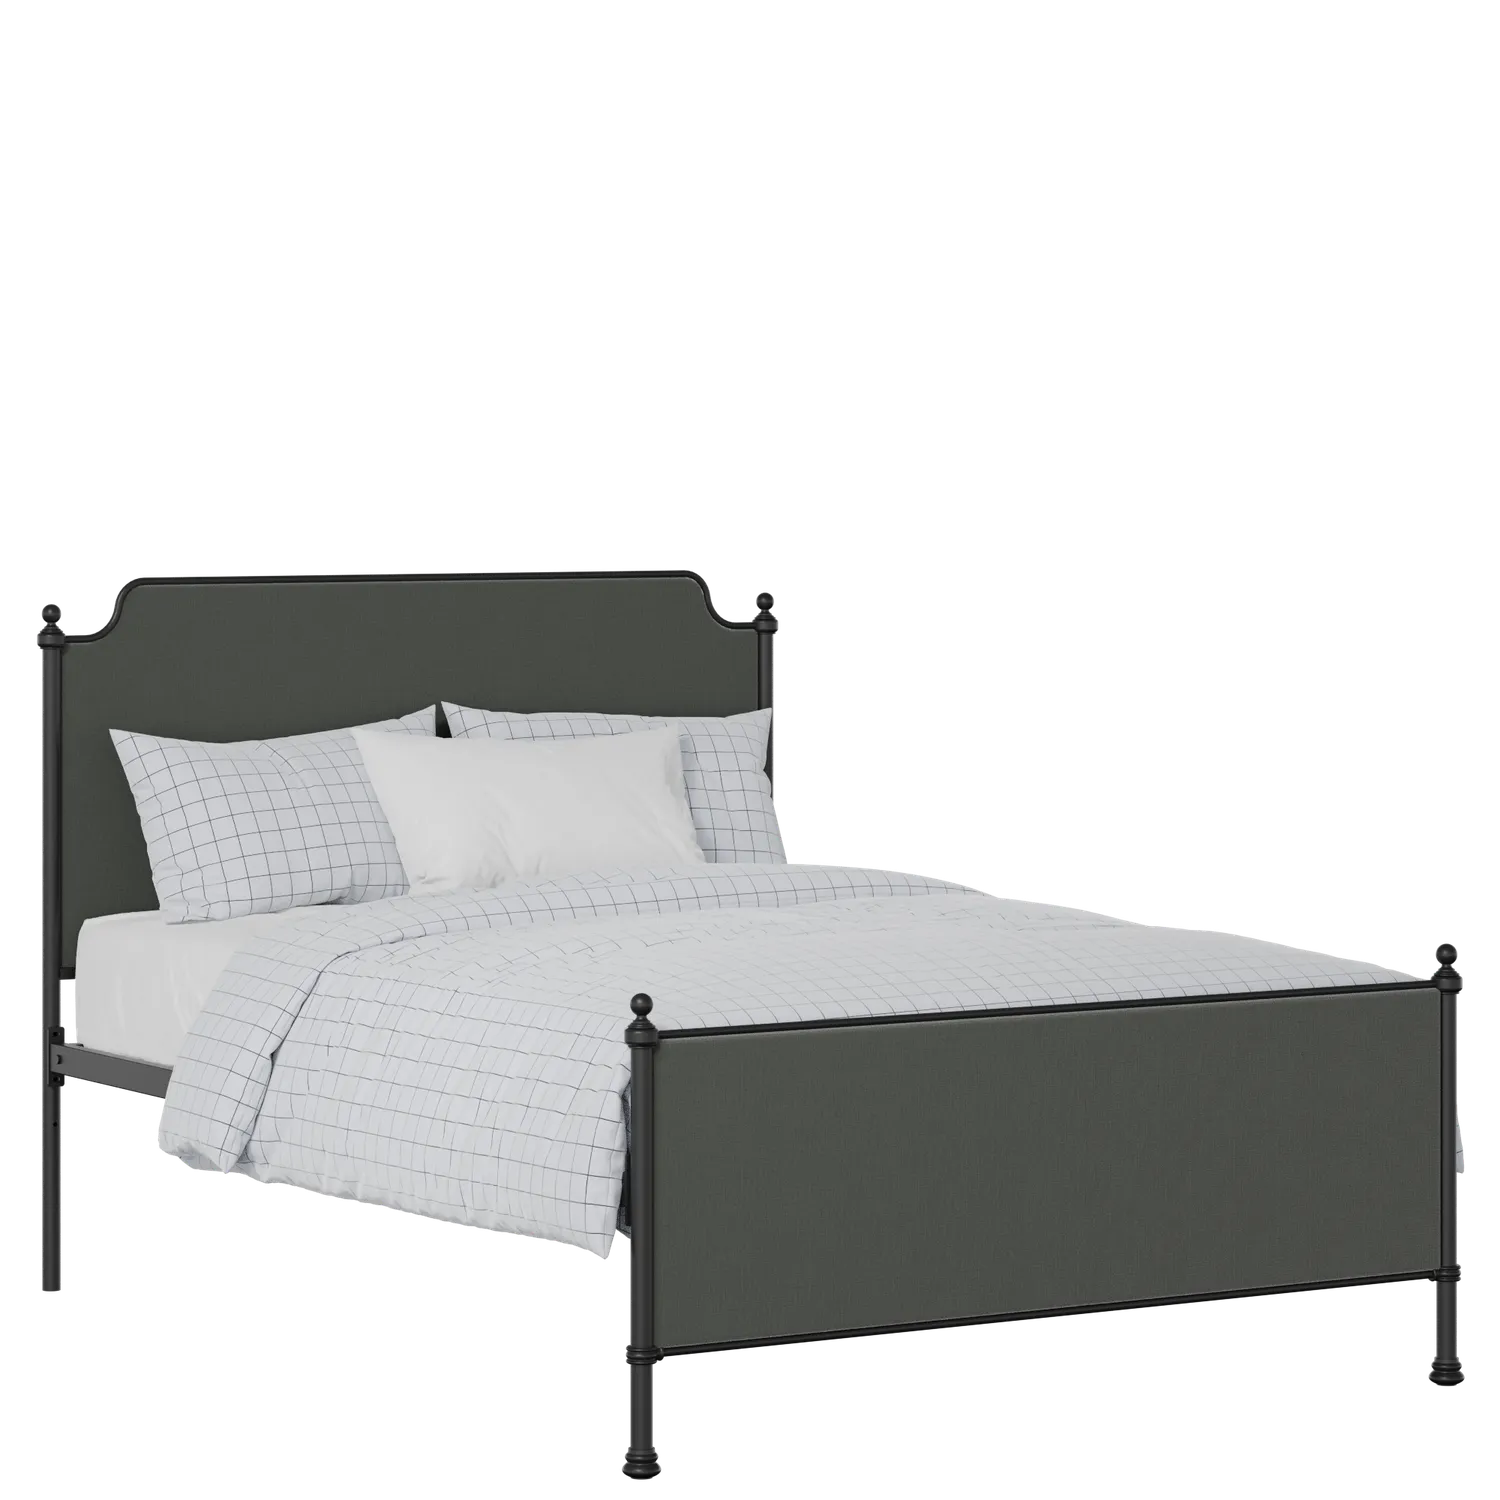 Miranda iron/metal upholstered bed in black with iron fabric